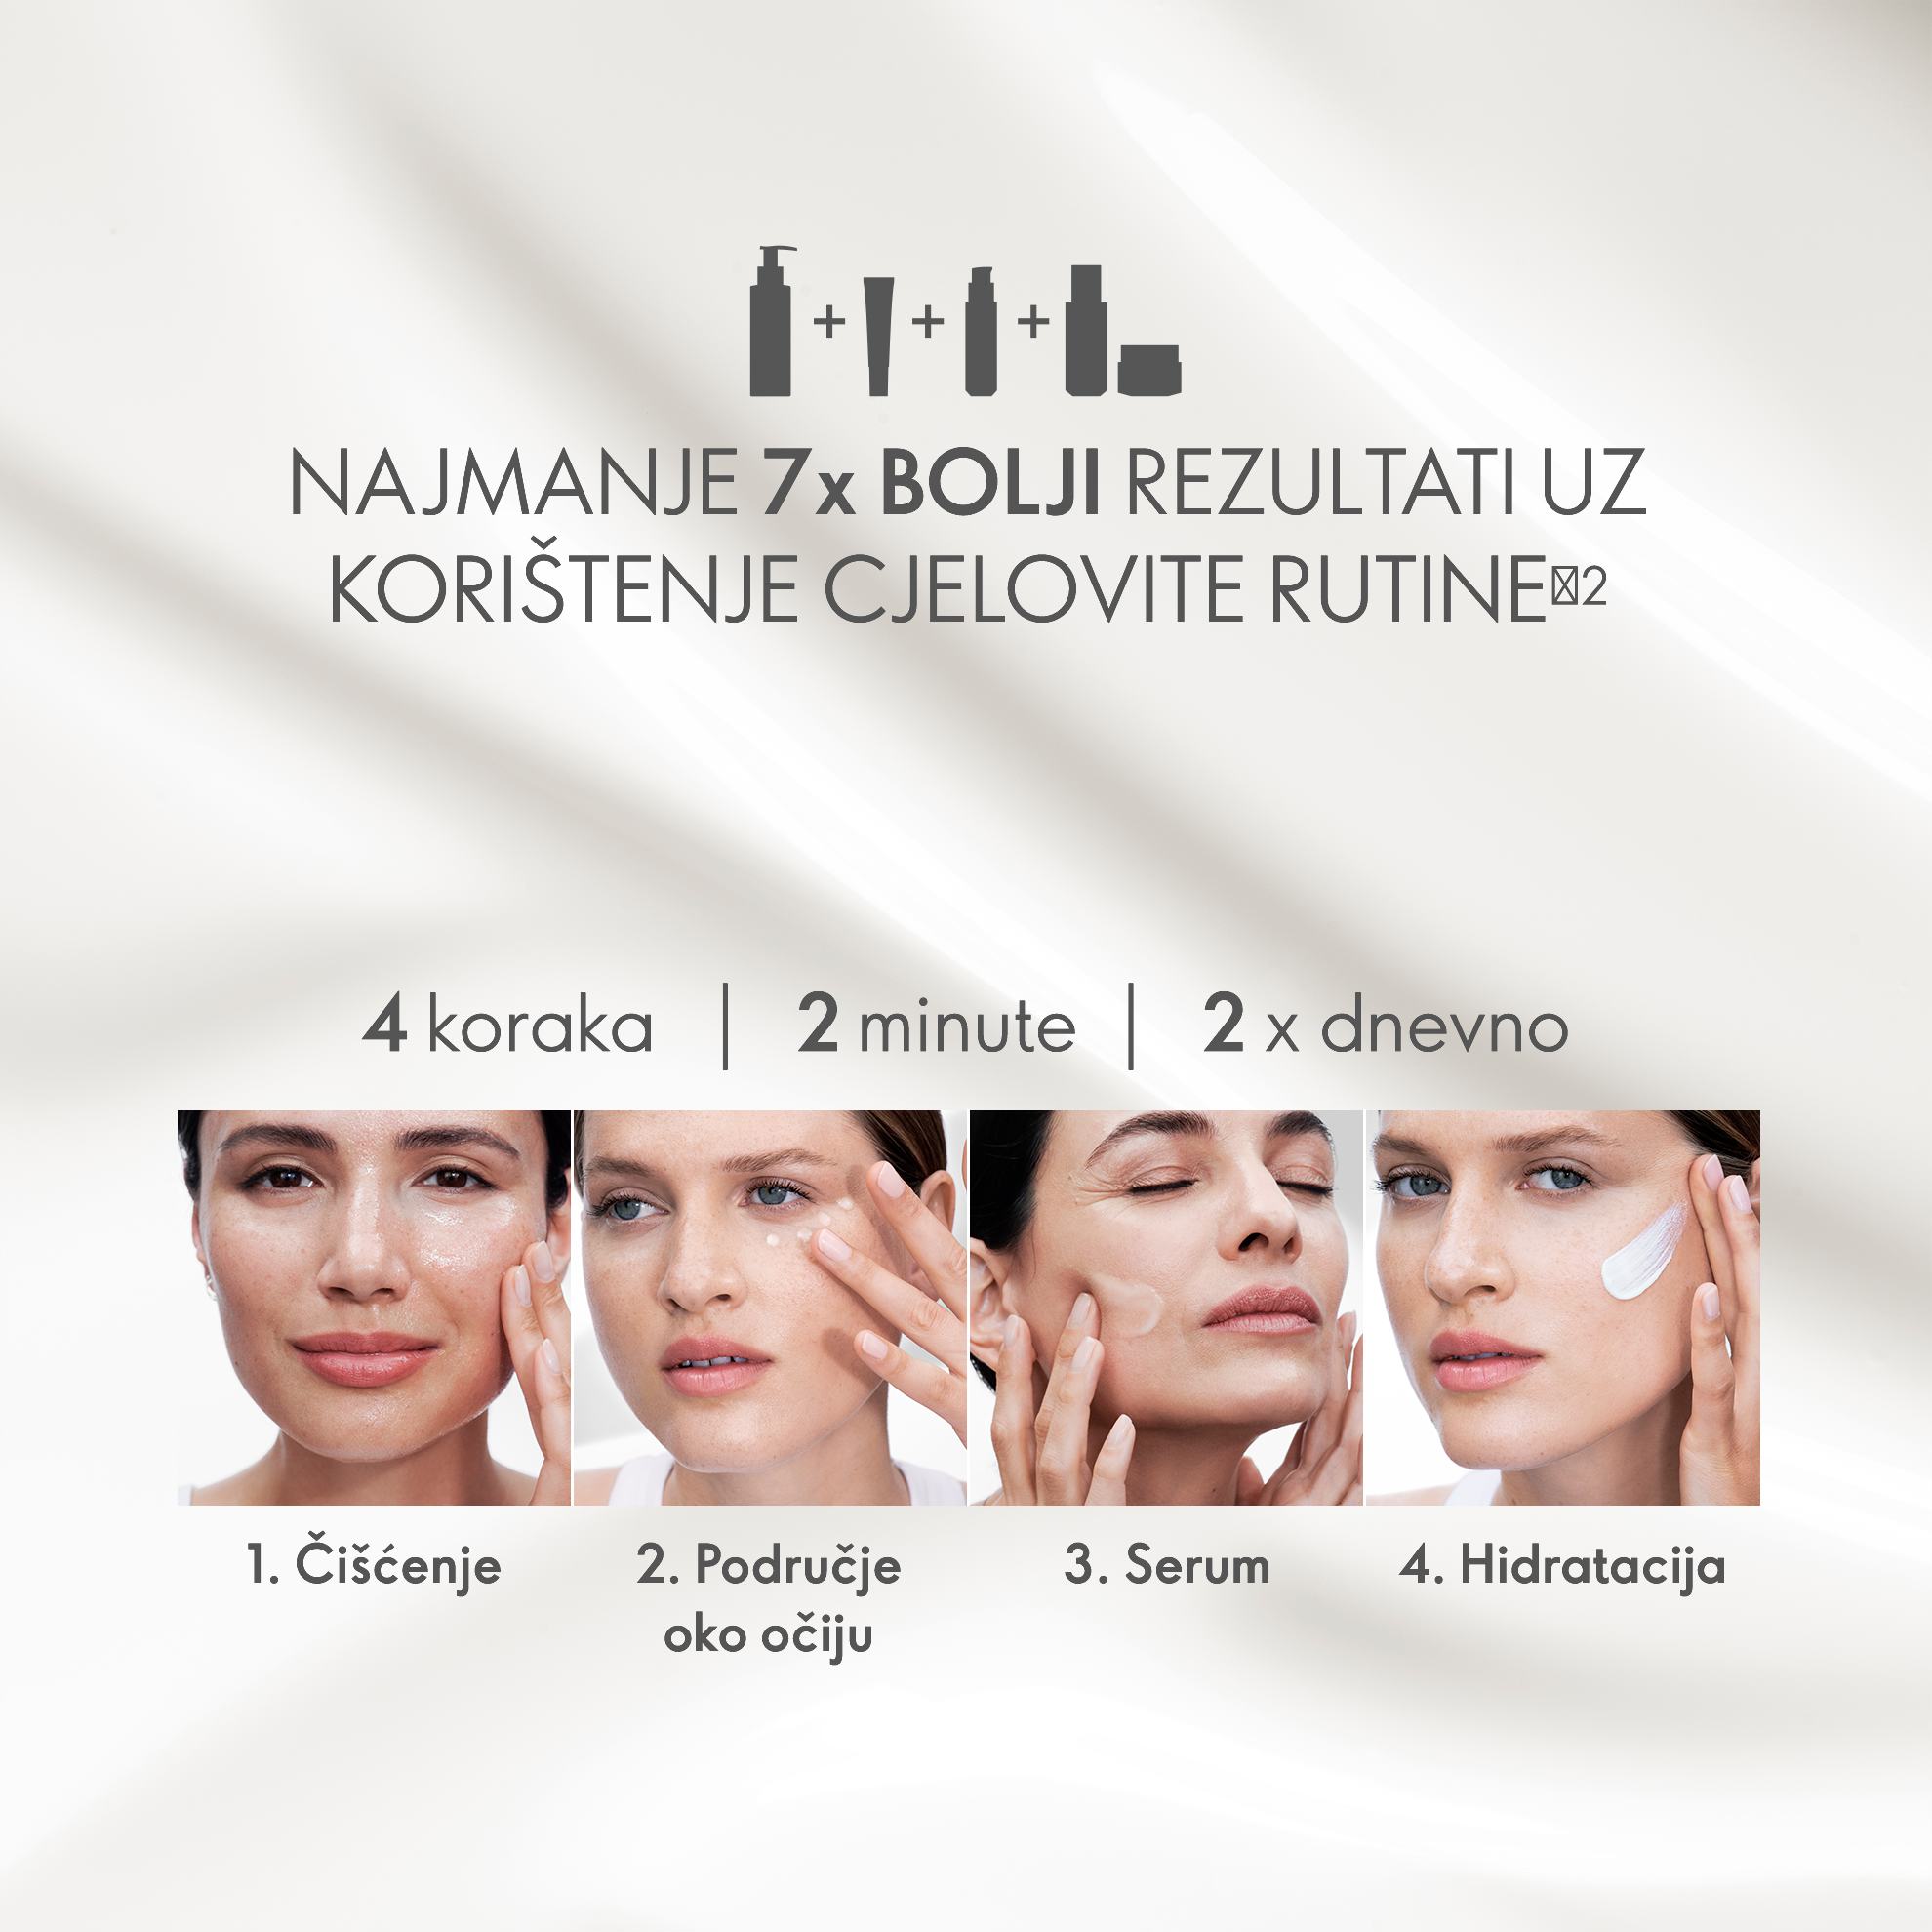 https://media-cdn.oriflame.com/productImage?externalMediaId=product-management-media%2fProducts%2f43691%2fHR%2f43691_4.png&id=17556266&version=1